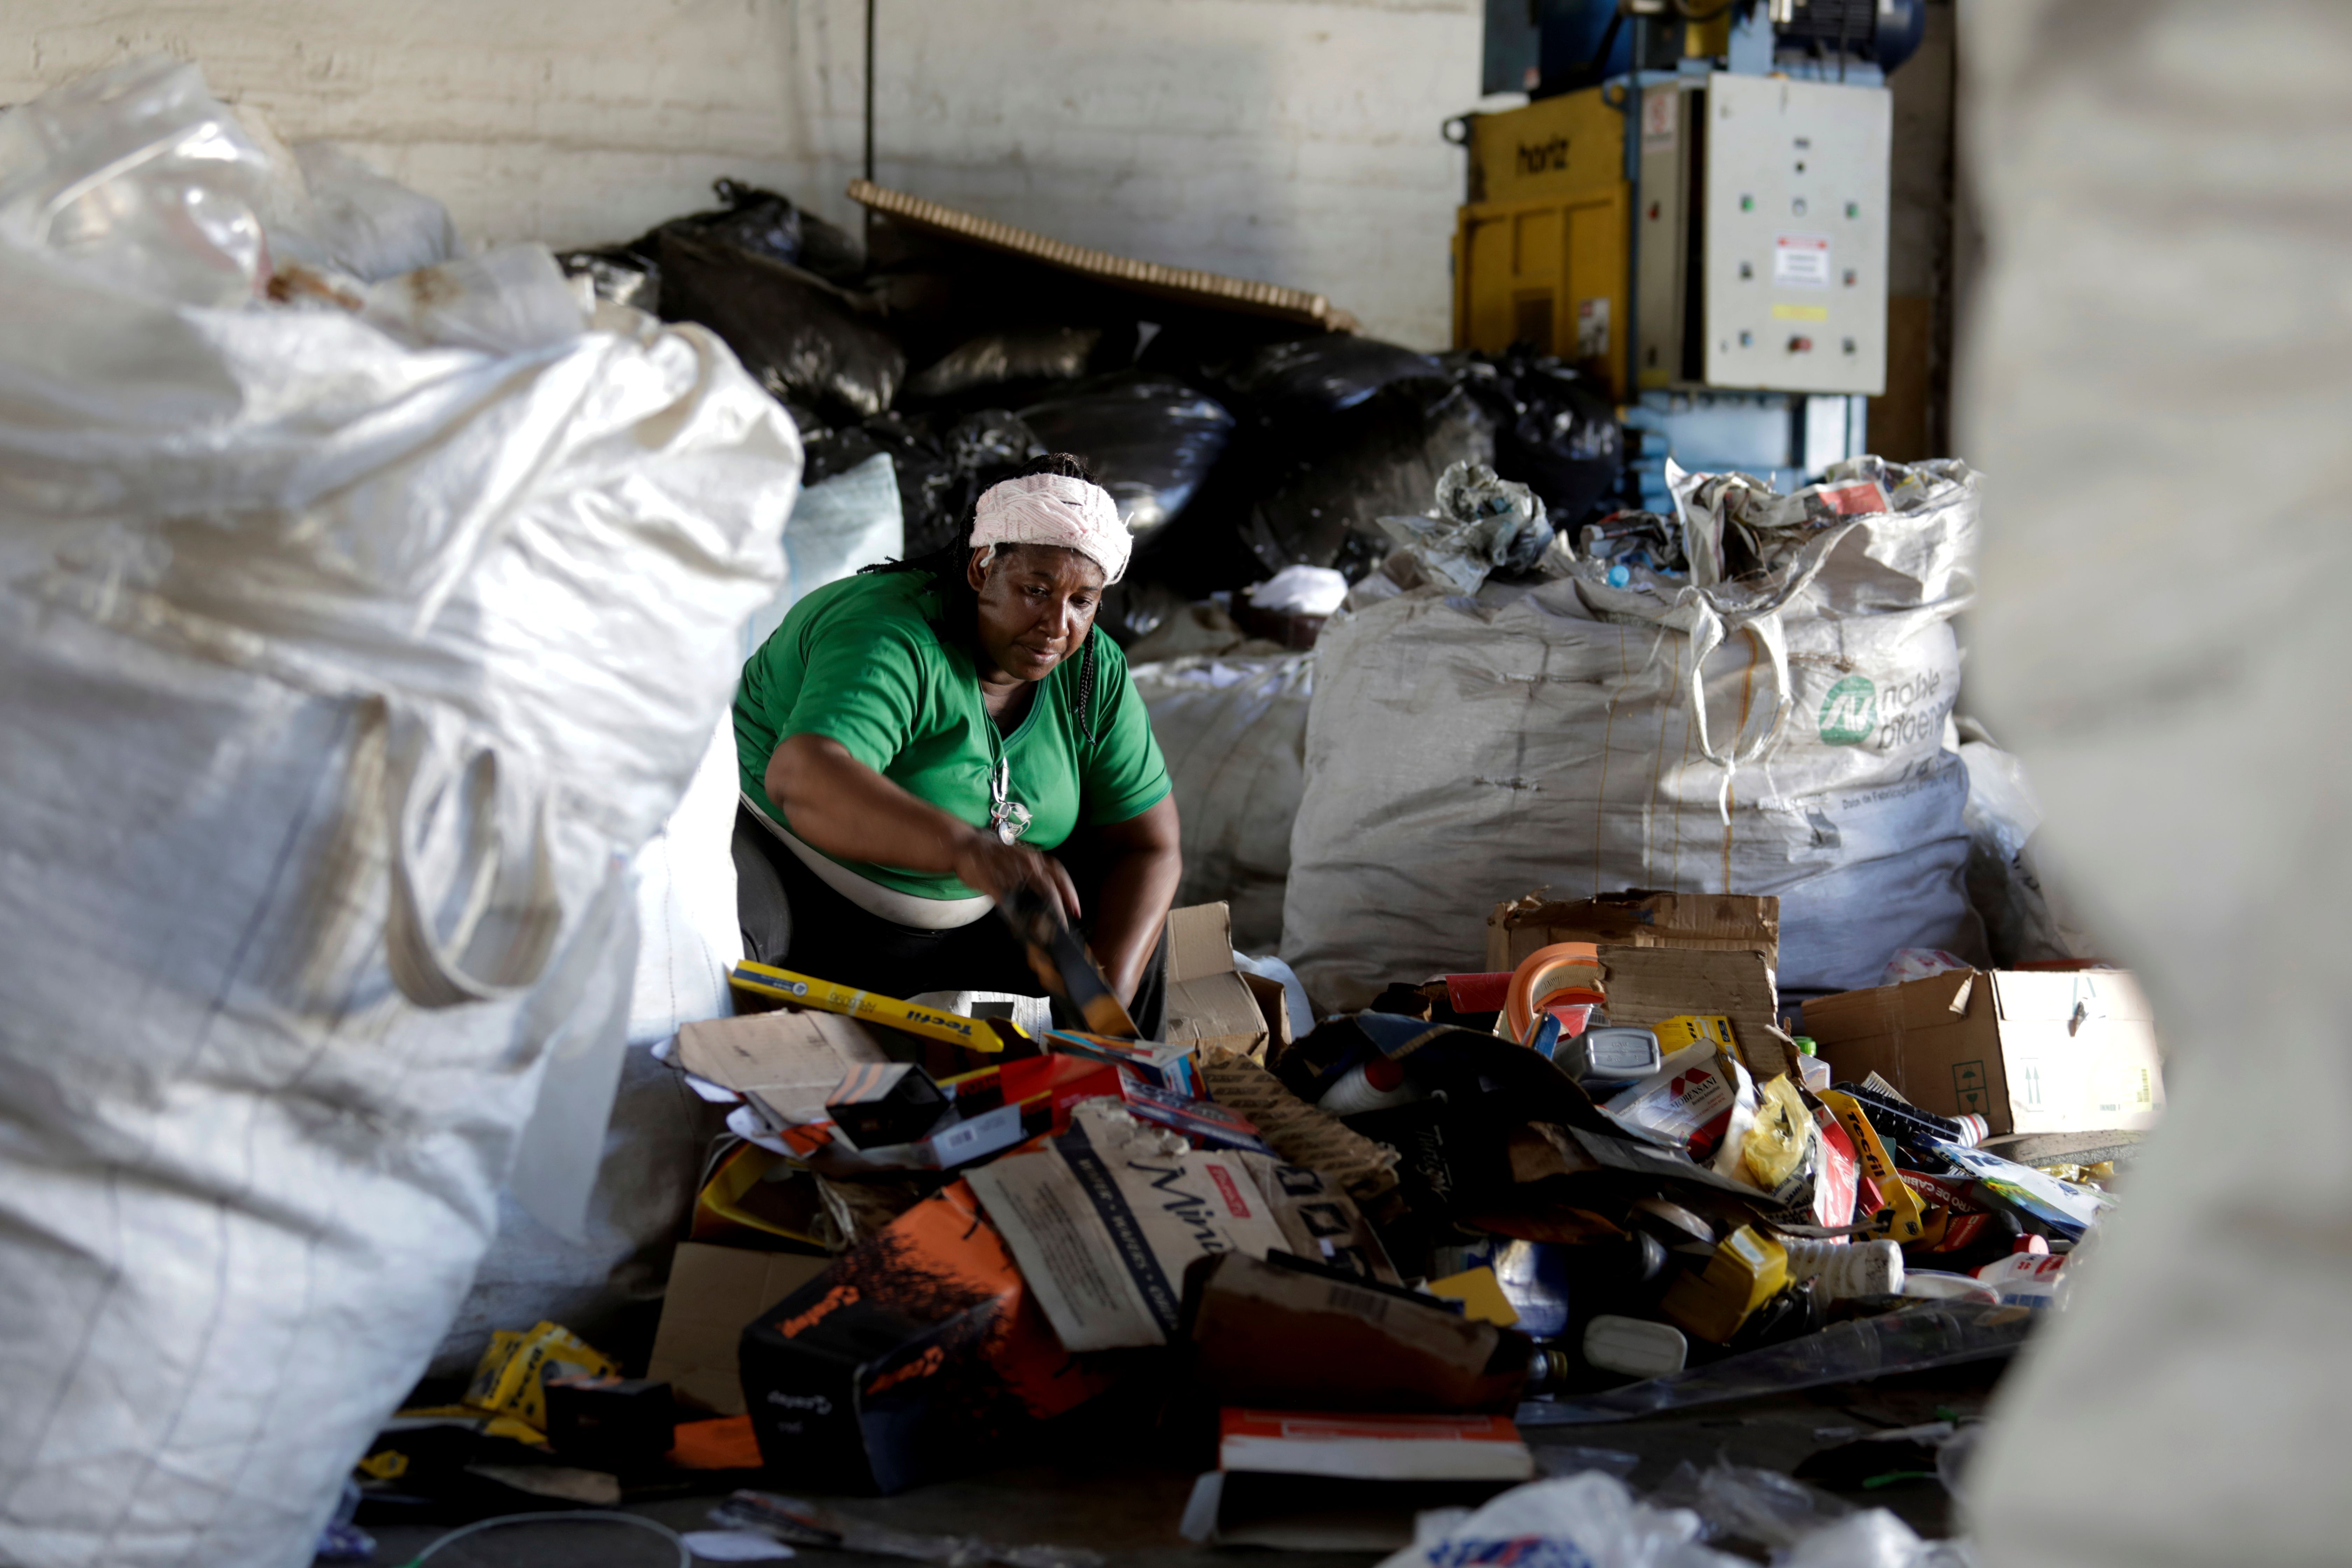 A worker at a recycling cooperative sorting through a pile of waste in Brazil.